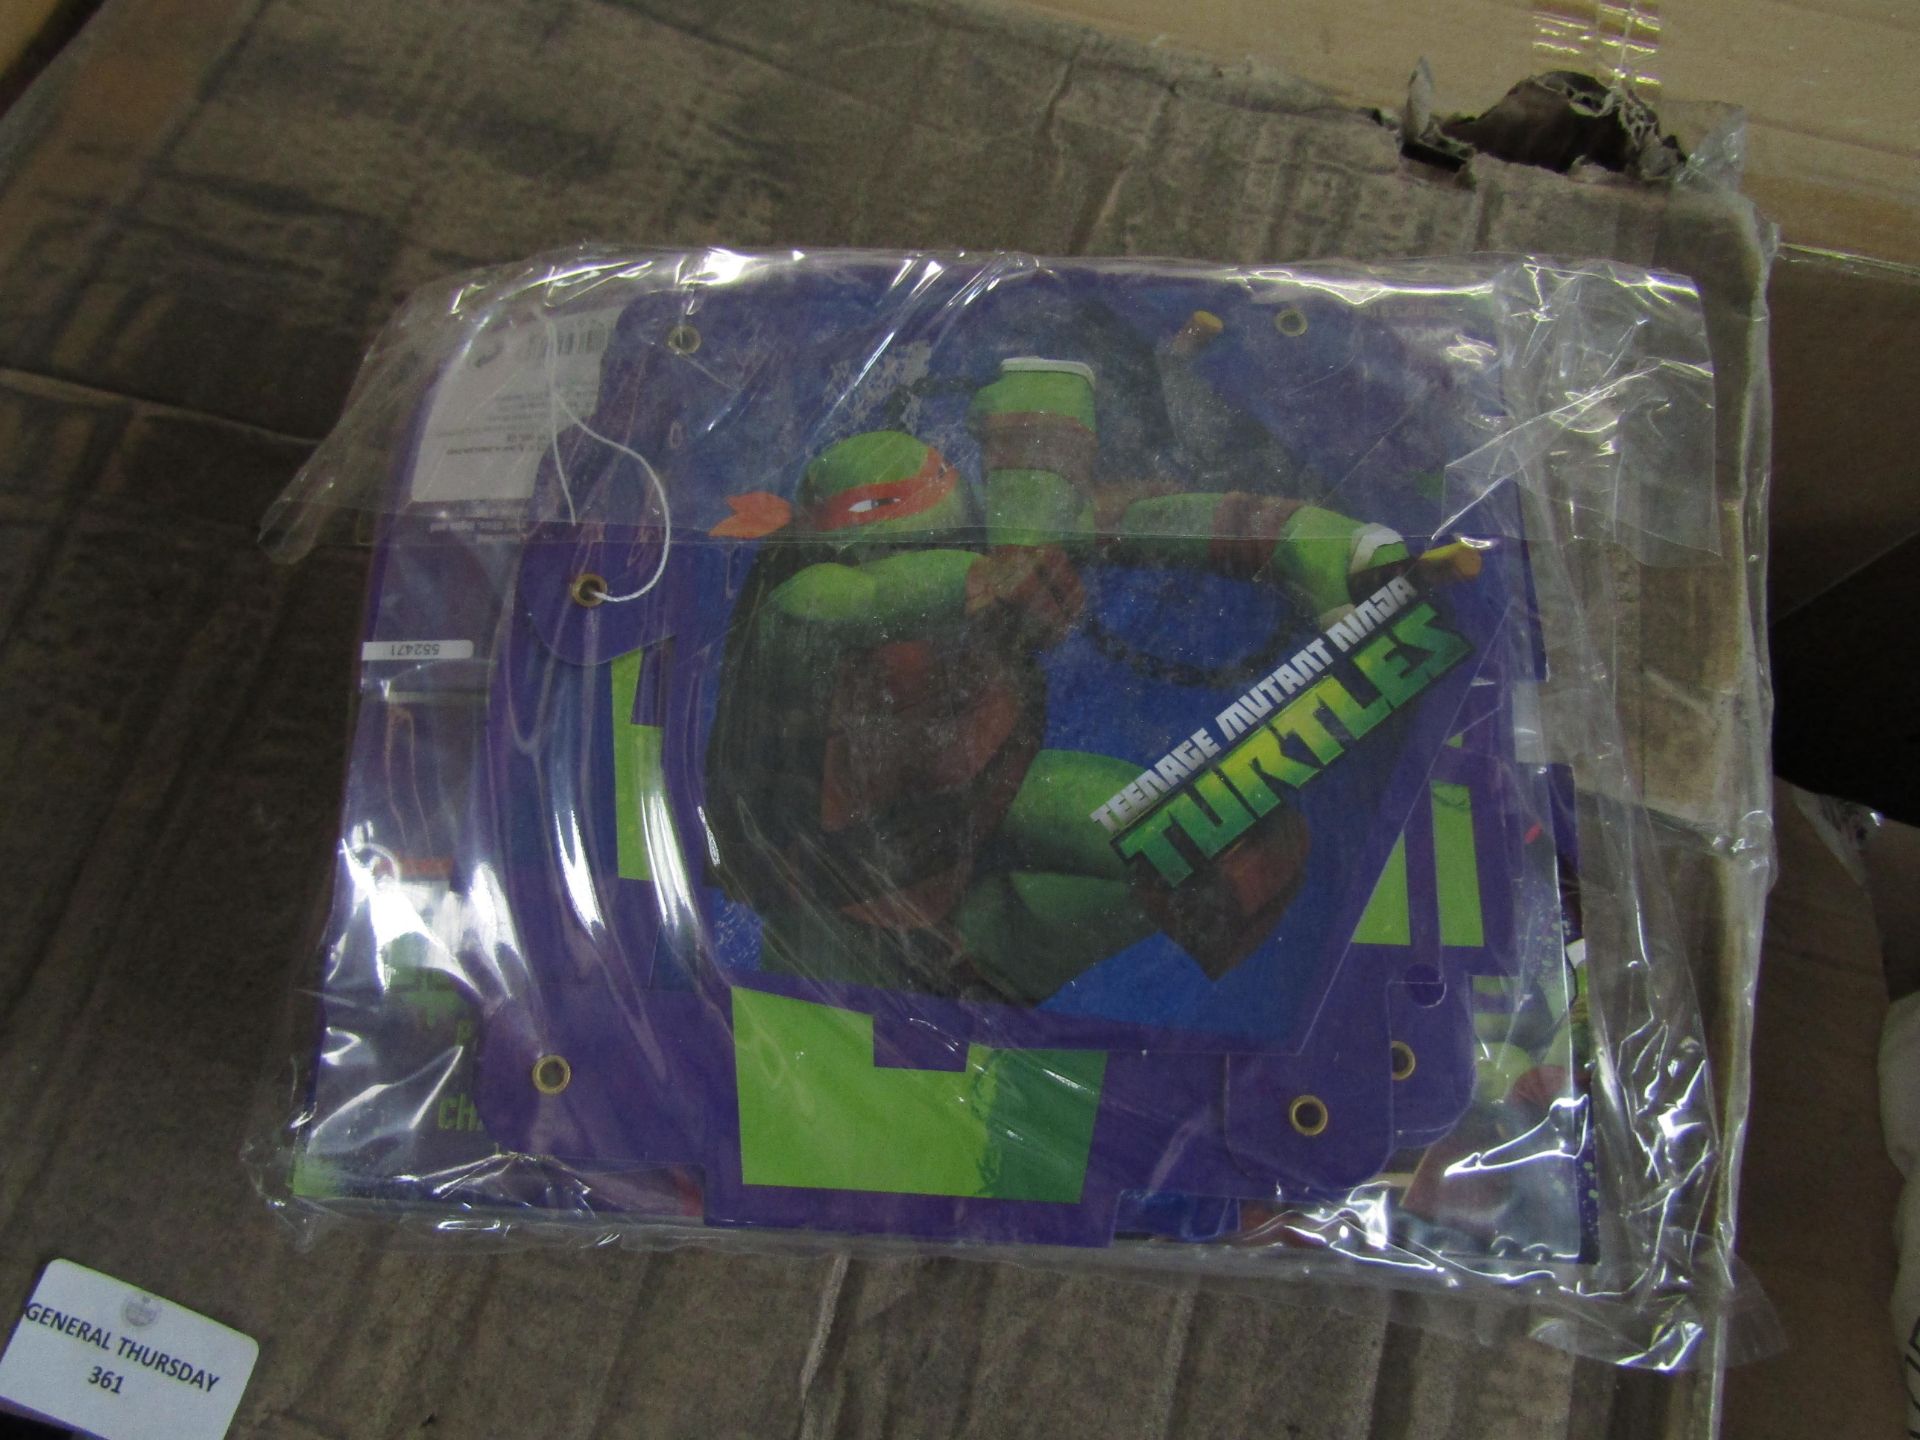 Box of approx 200 Ninja turtles party banners, all unused